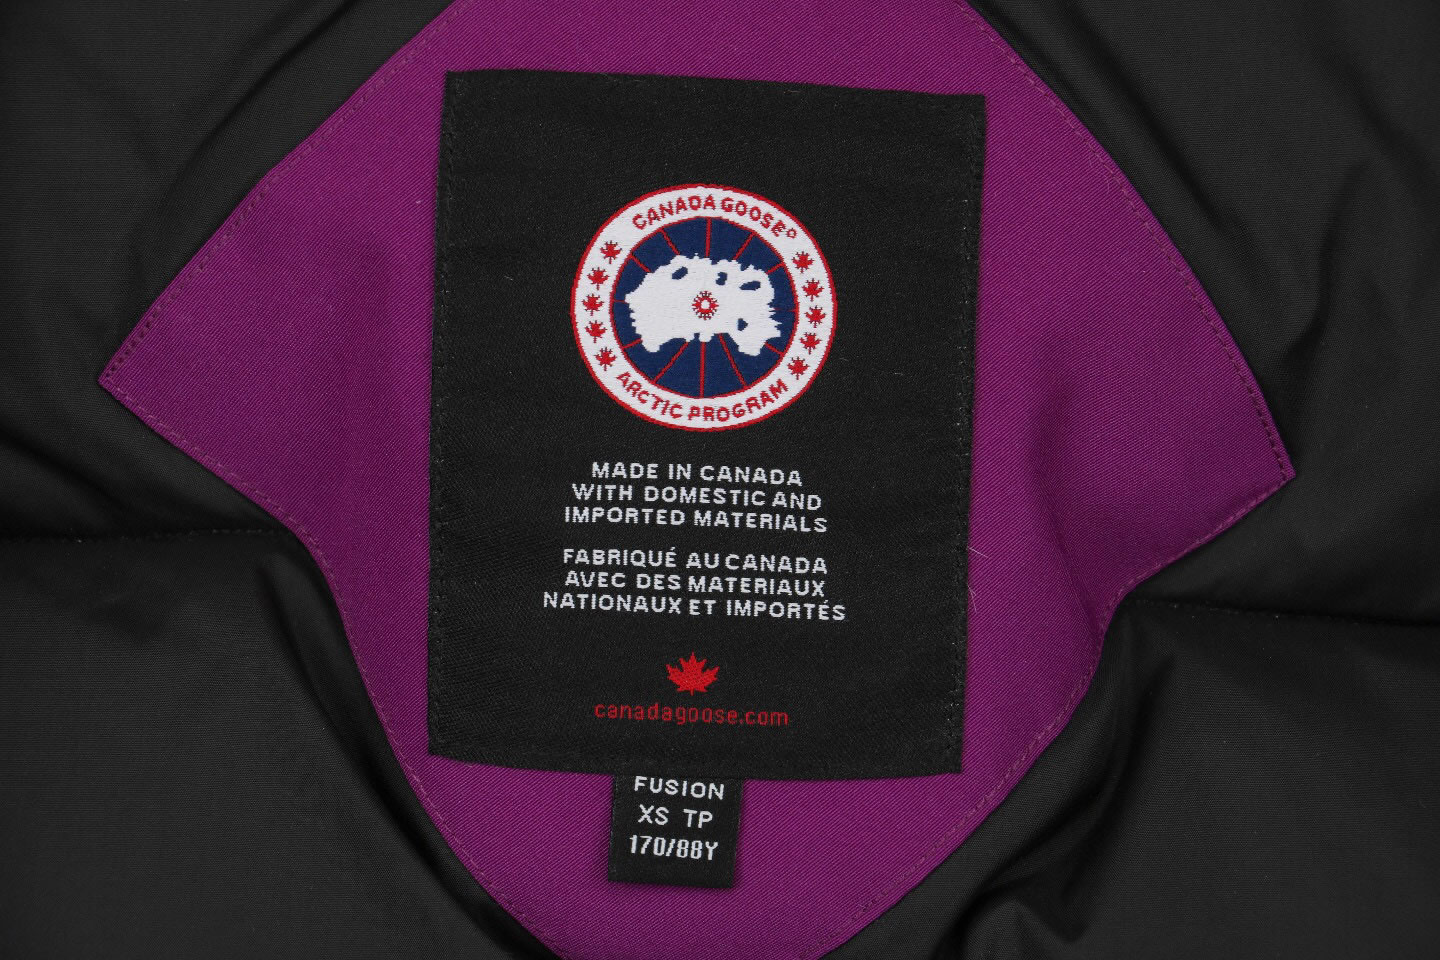 08 Canada Goose 19fw Expedition 4660ma Down Jacket Coat Purple (8) - newkick.org